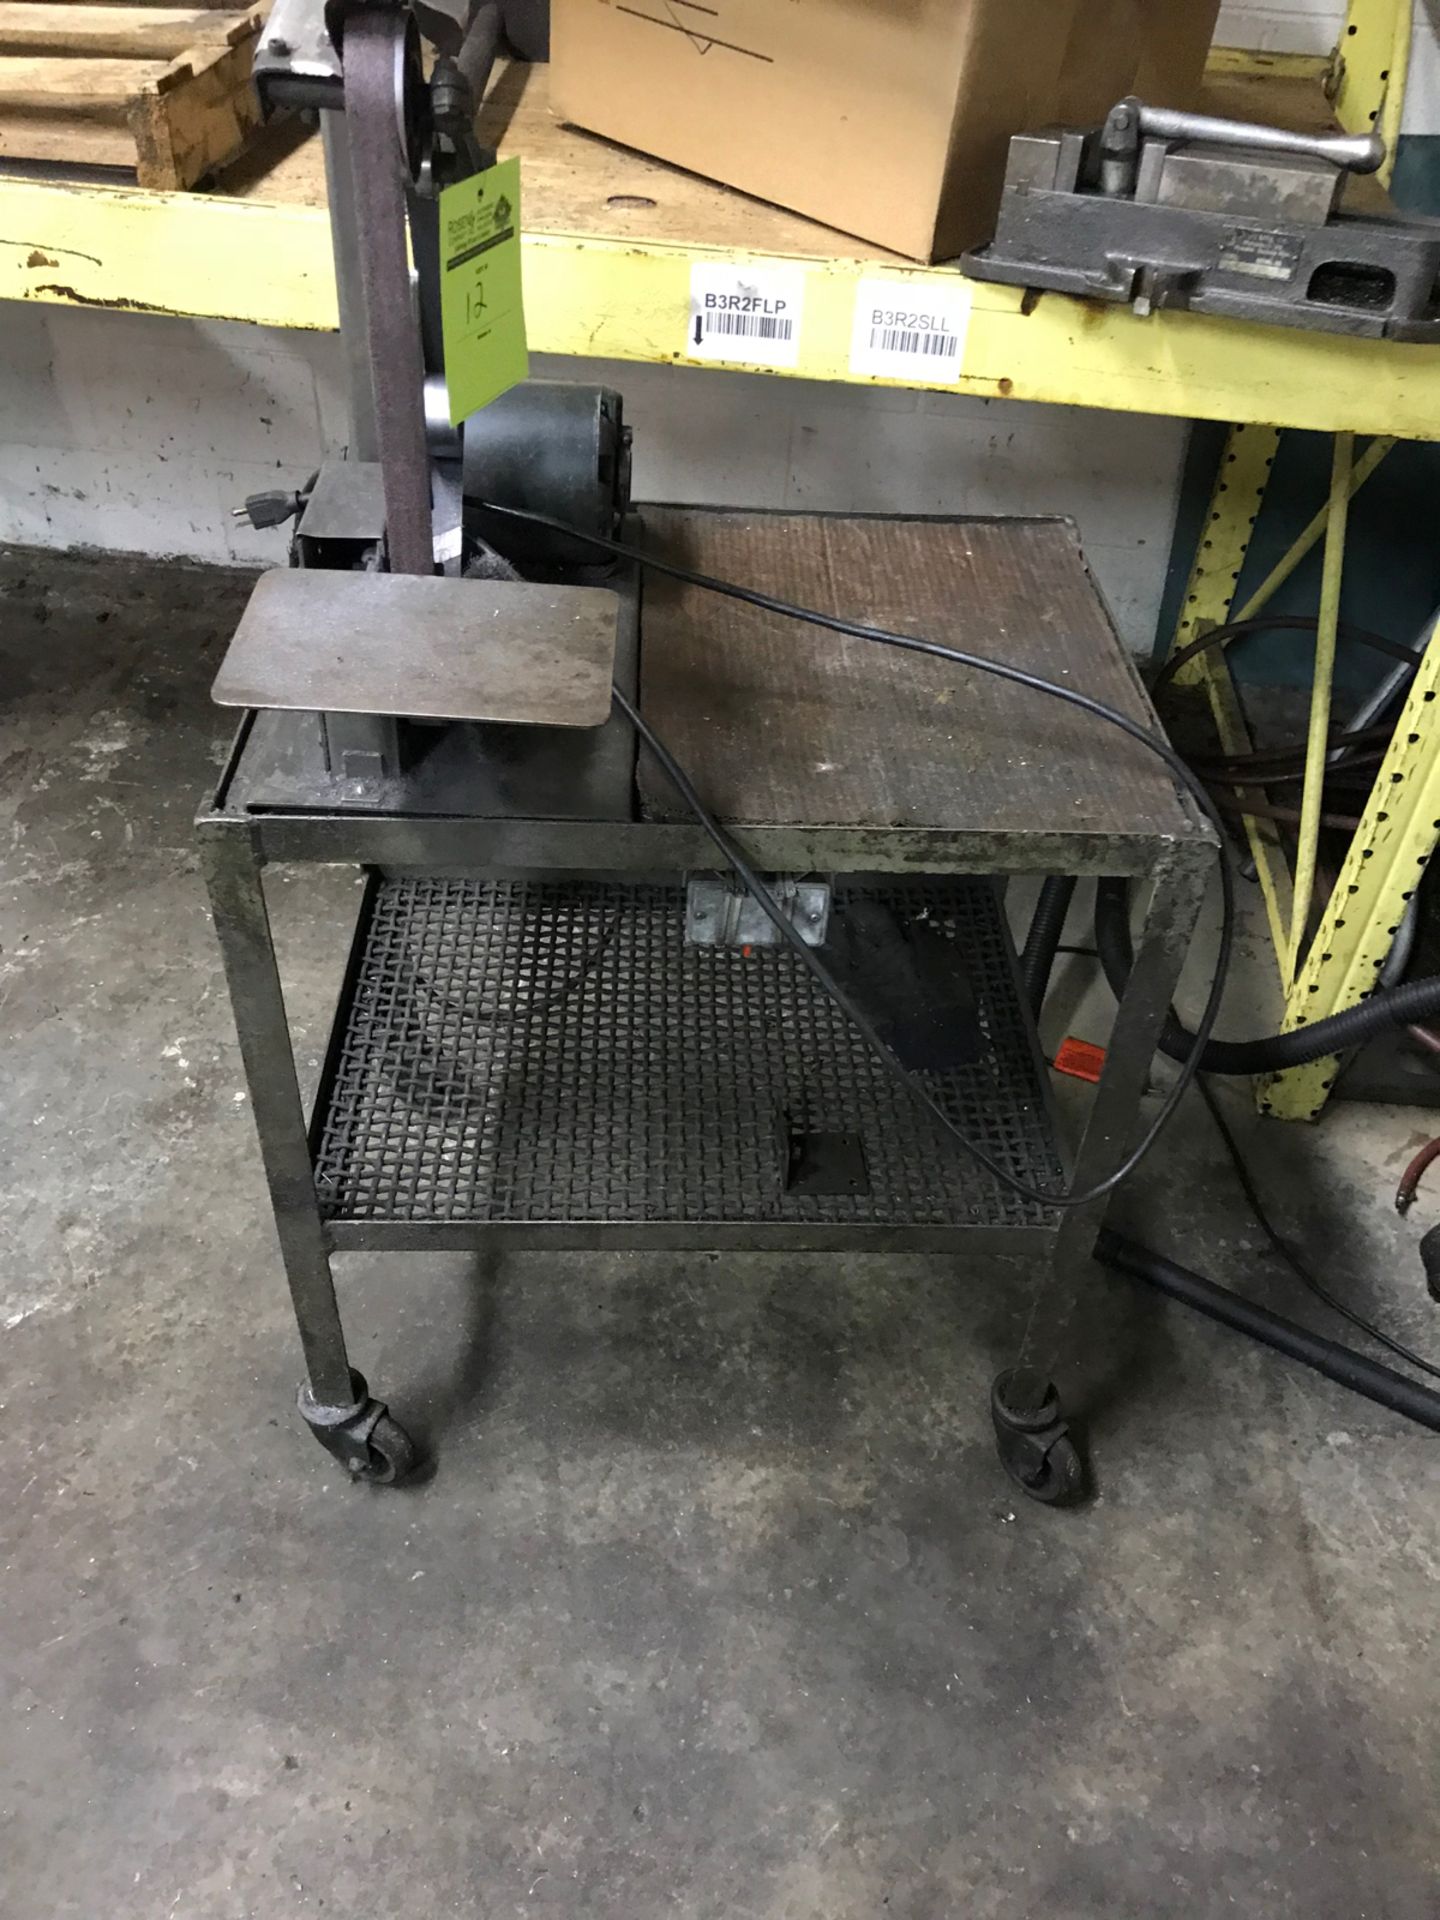 Rolling cart with 1 inch belt sander mounted